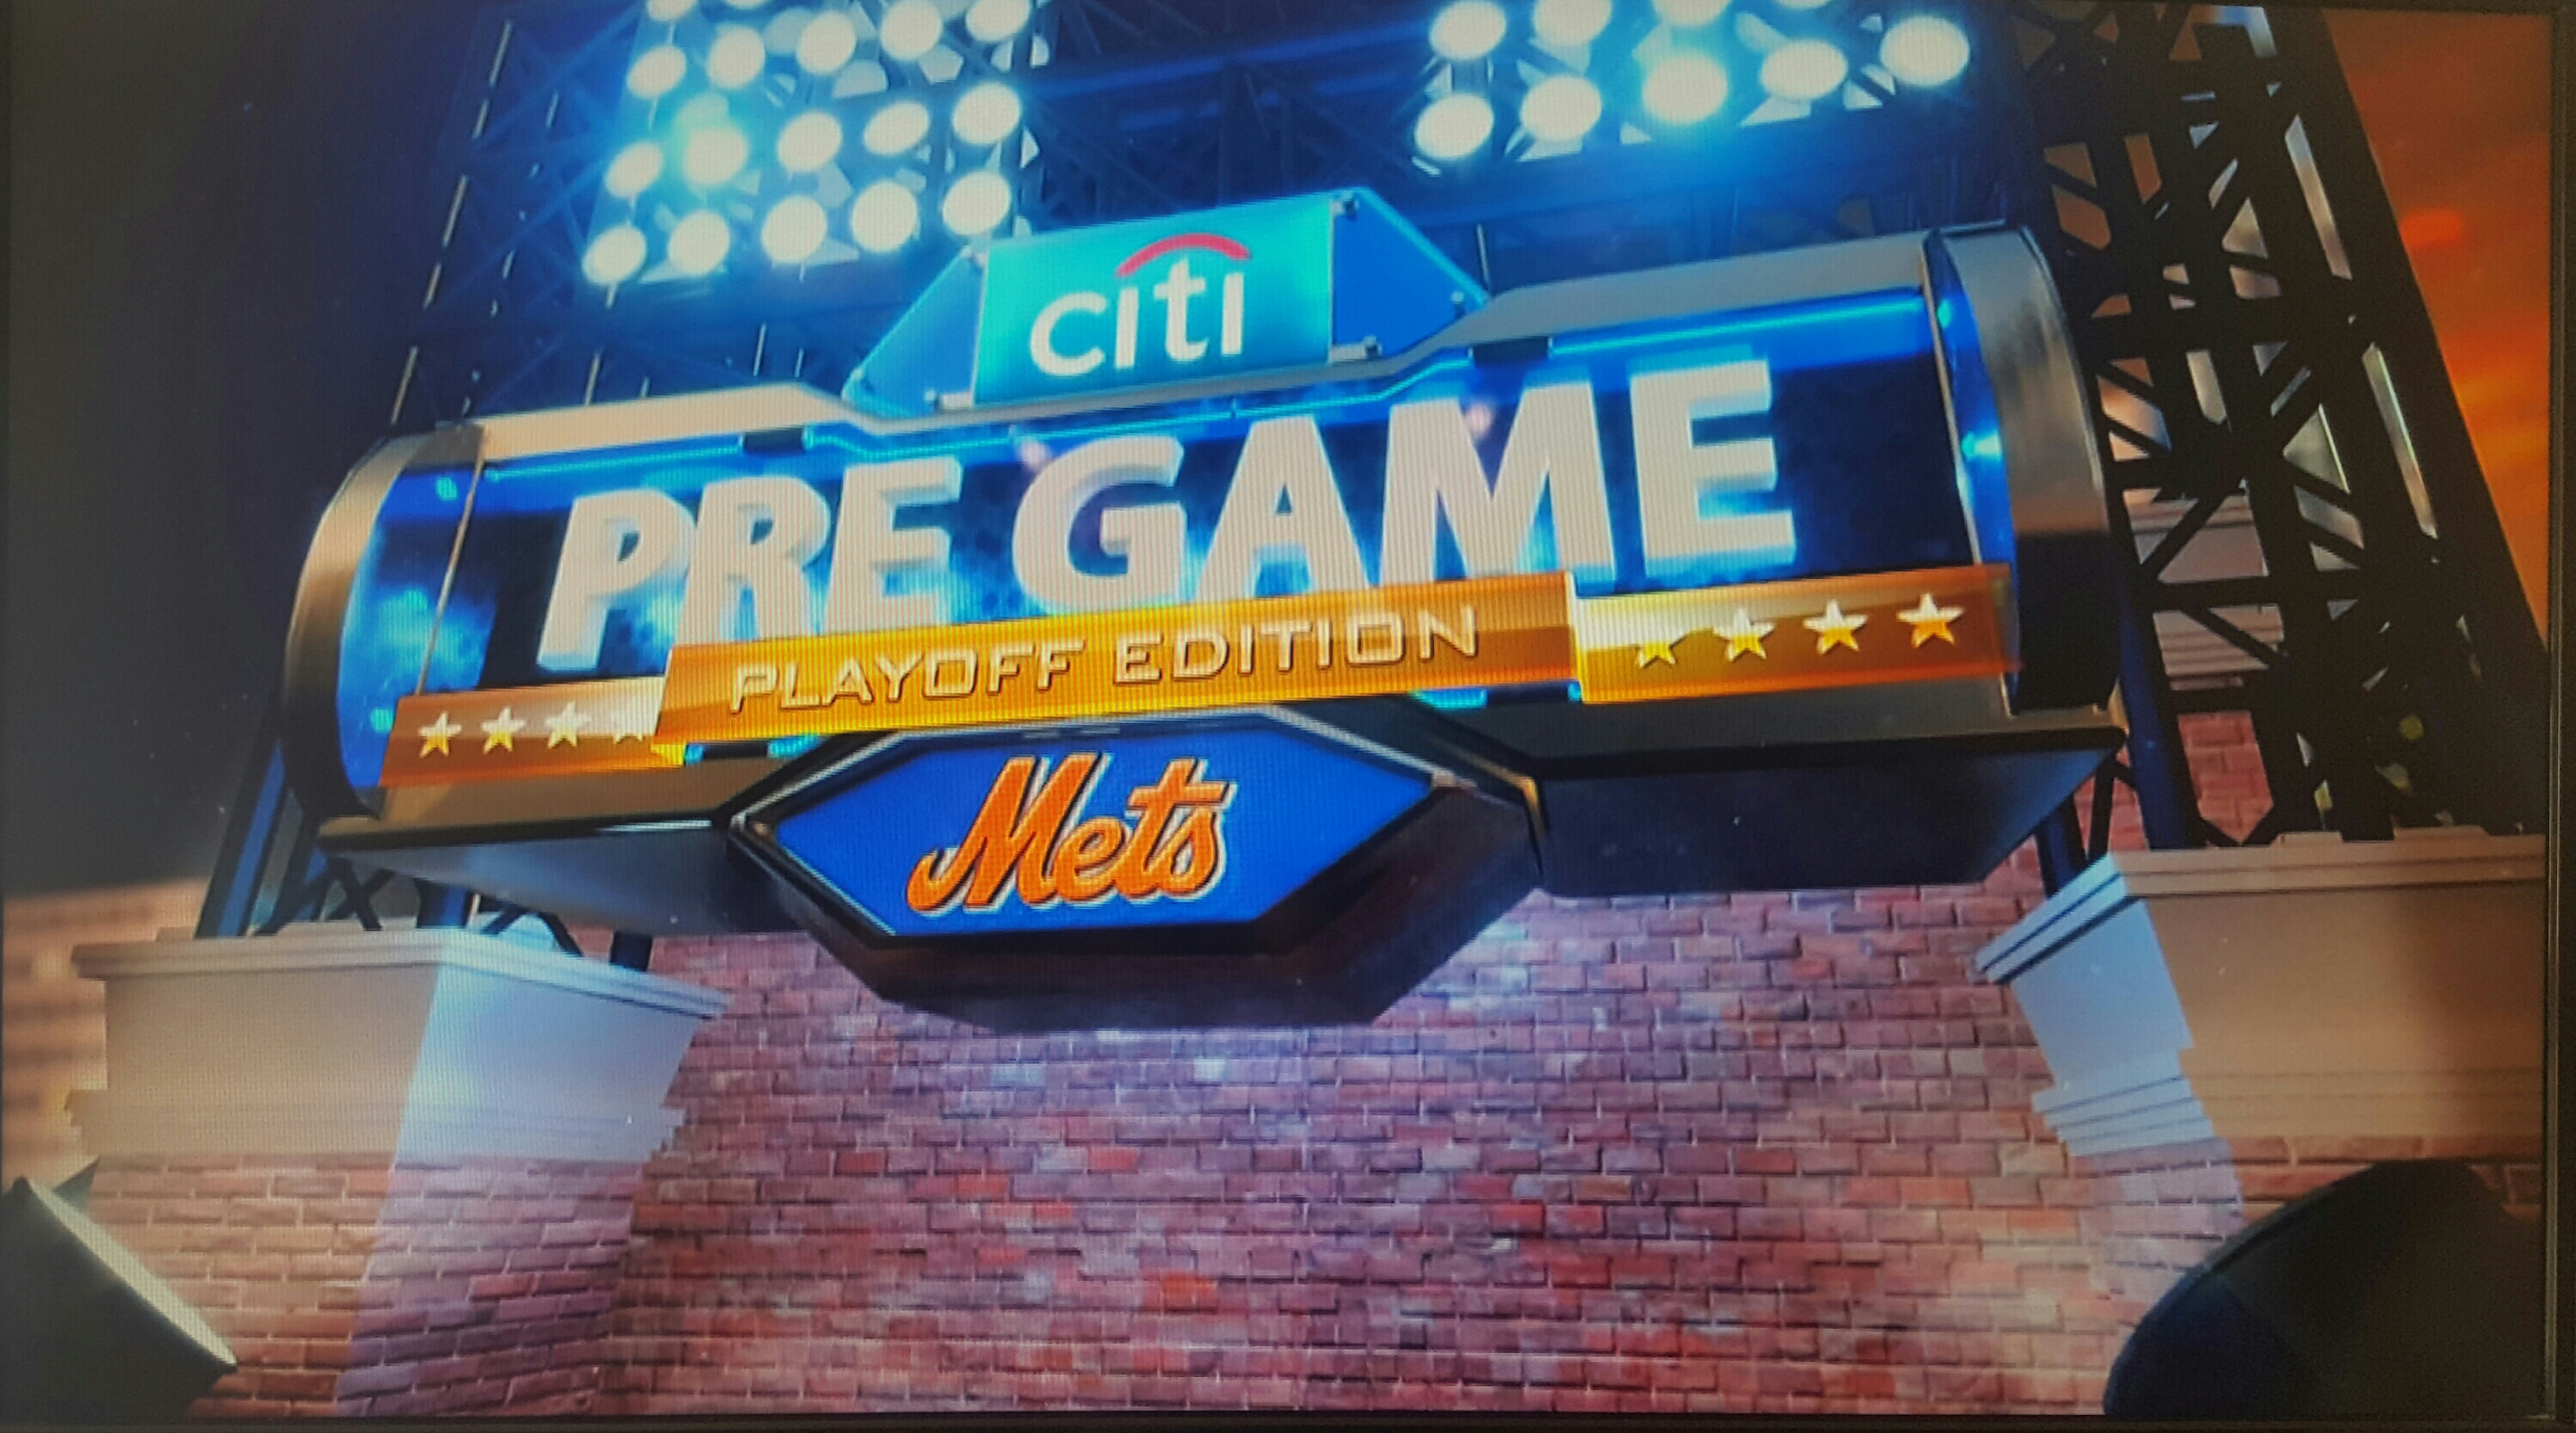 MMO Exclusive: '86 Mets Champ and SNY Broadcaster, Ron Darling -  Metsmerized Online